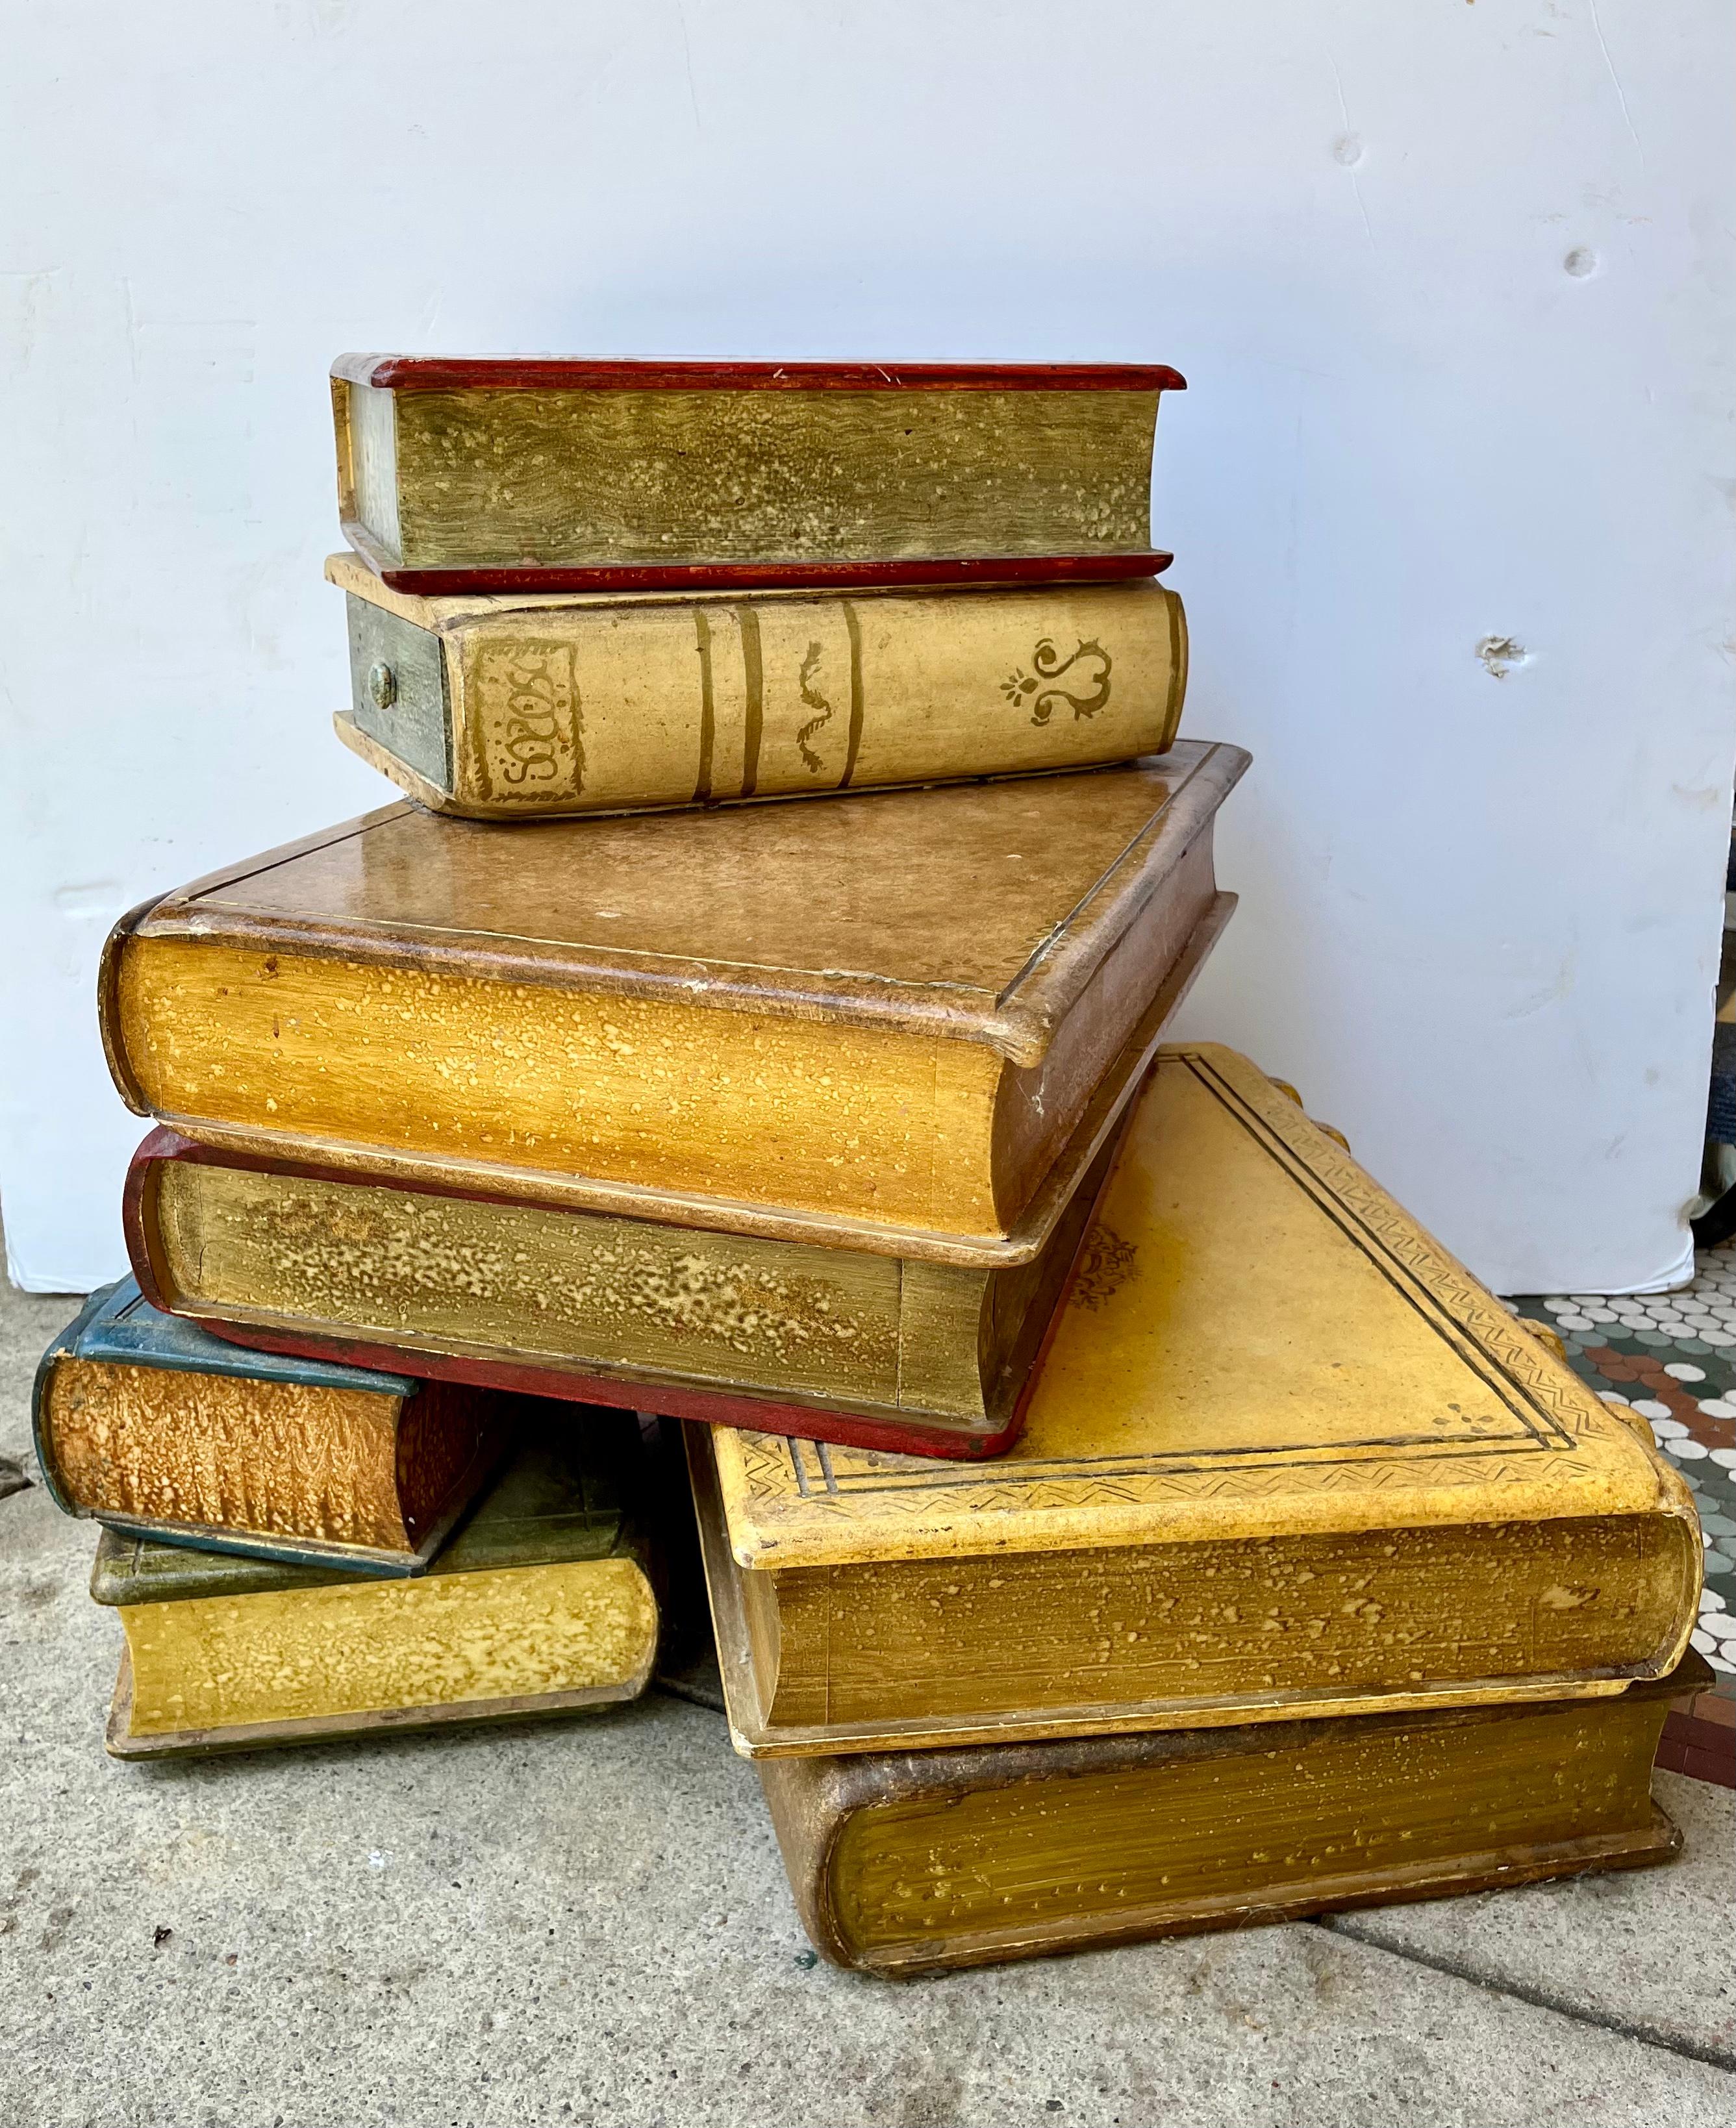 Colorful faux Books as a low table with two not-so-obvious drawers .All four stacks connected as one table .

Provenance : Sir Rex Harrison ,Oscar Winner - Best Actor for Lead in My Fair Lady . Sculpted  and polychrome painted ,gilt decorated wood